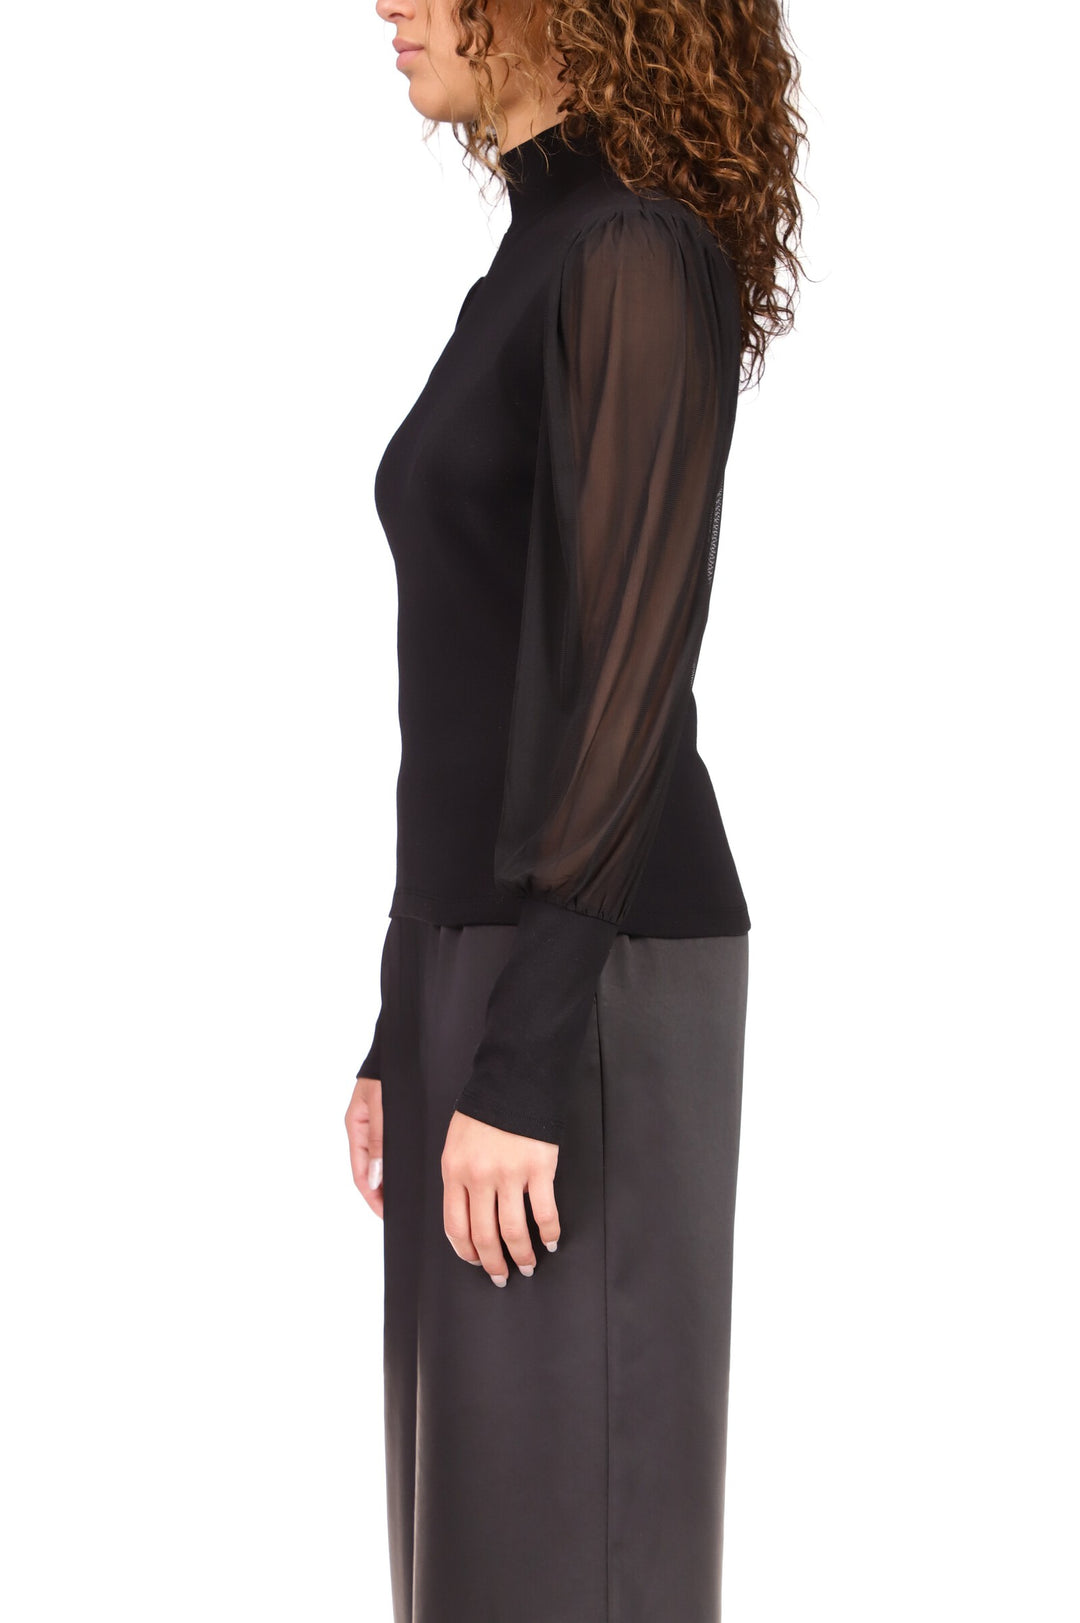 ON MY MIND MESH SLEEVE TOP - BLACK - Kingfisher Road - Online Boutique